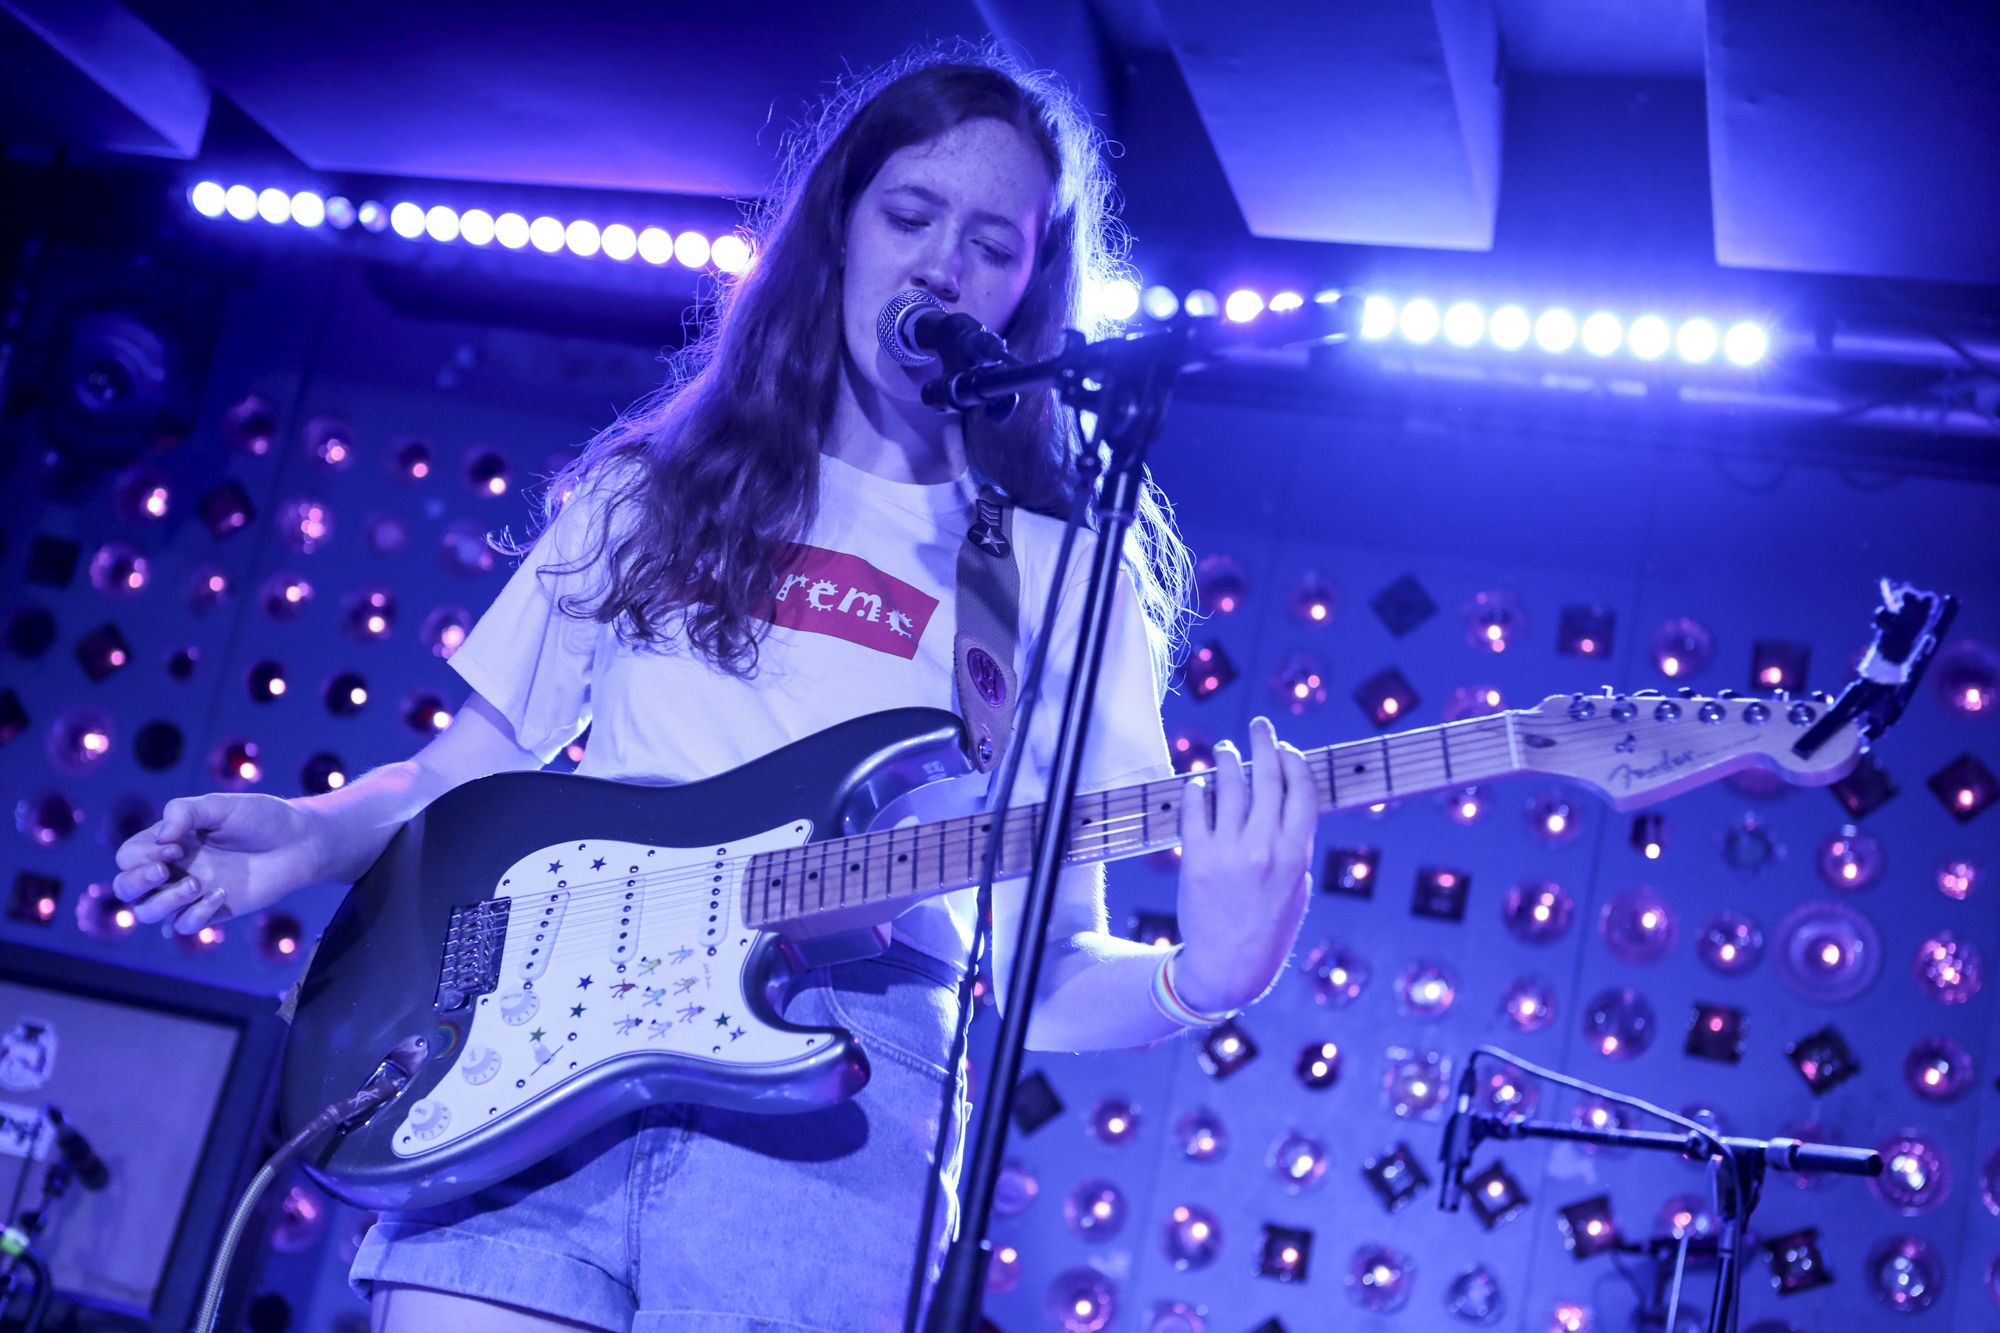 Sidney Gish plays the Double Double Whammy x GLRMIC x Terrorbird Media day party during Northside Festival at Baby's All Right in Williamsburg, Brooklyn, New York on June 9, 2018. (© Michael Katzif - Do not use or republish without prior consent.)